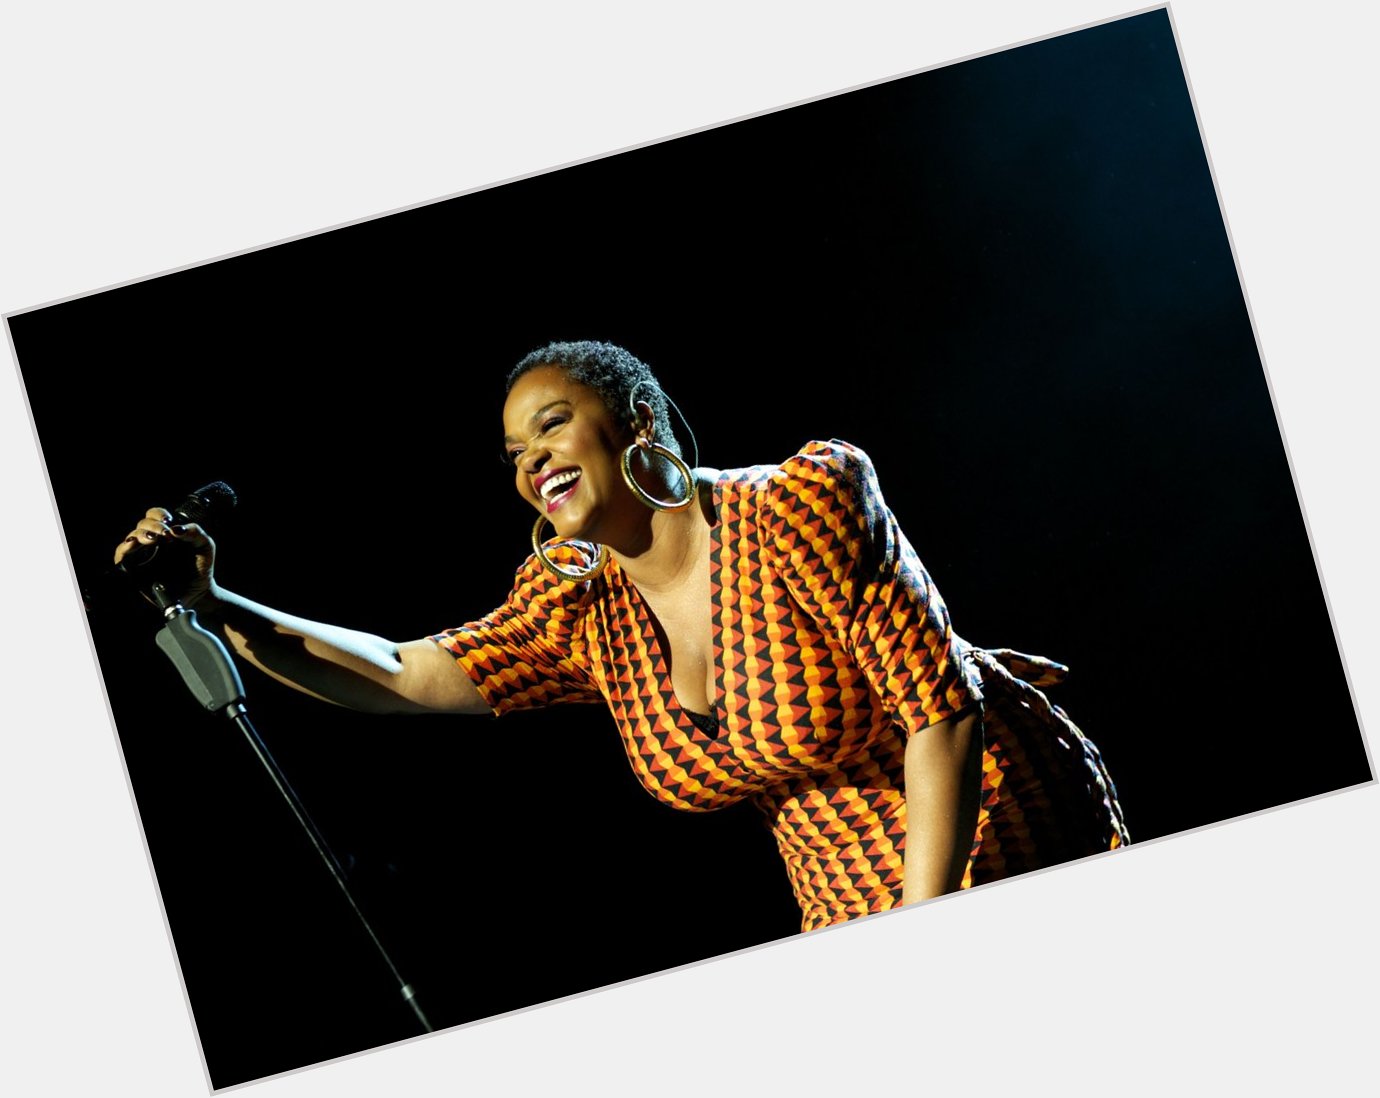 \I\m living my life like it\s golden\

Happy Birthday to the golden lady Jill Scott who turns 50 today 